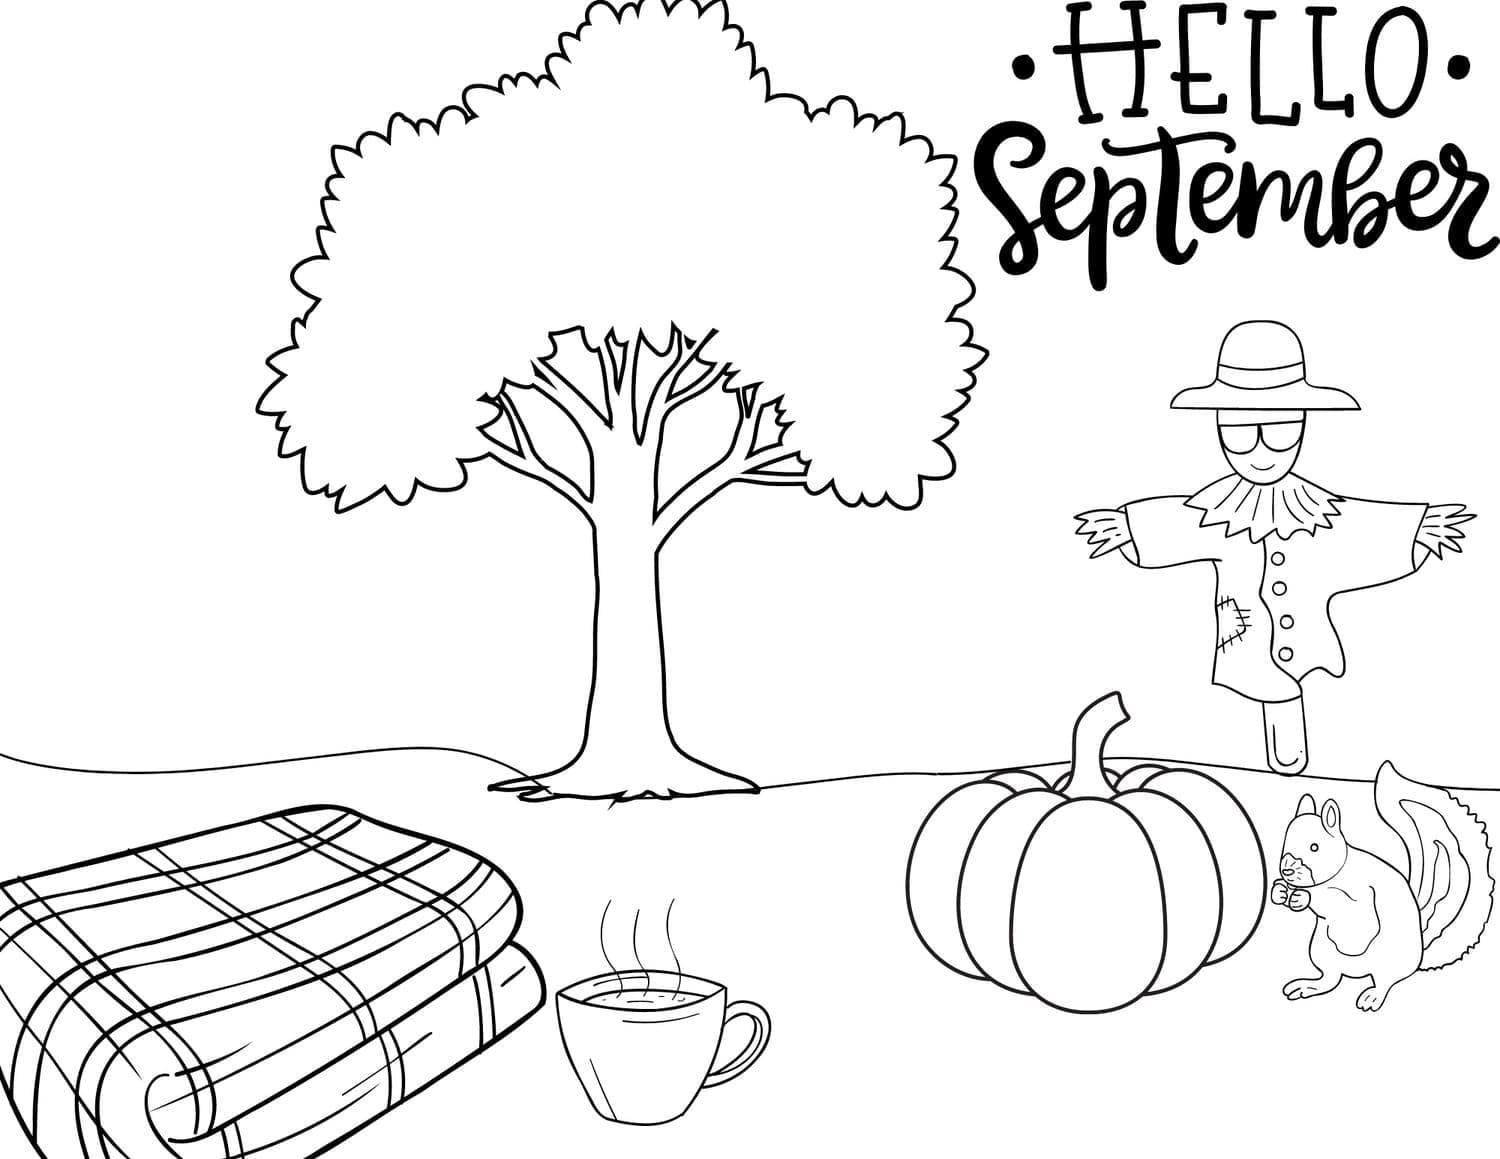 Print Hello September coloring page - Download, Print or Color Online ...